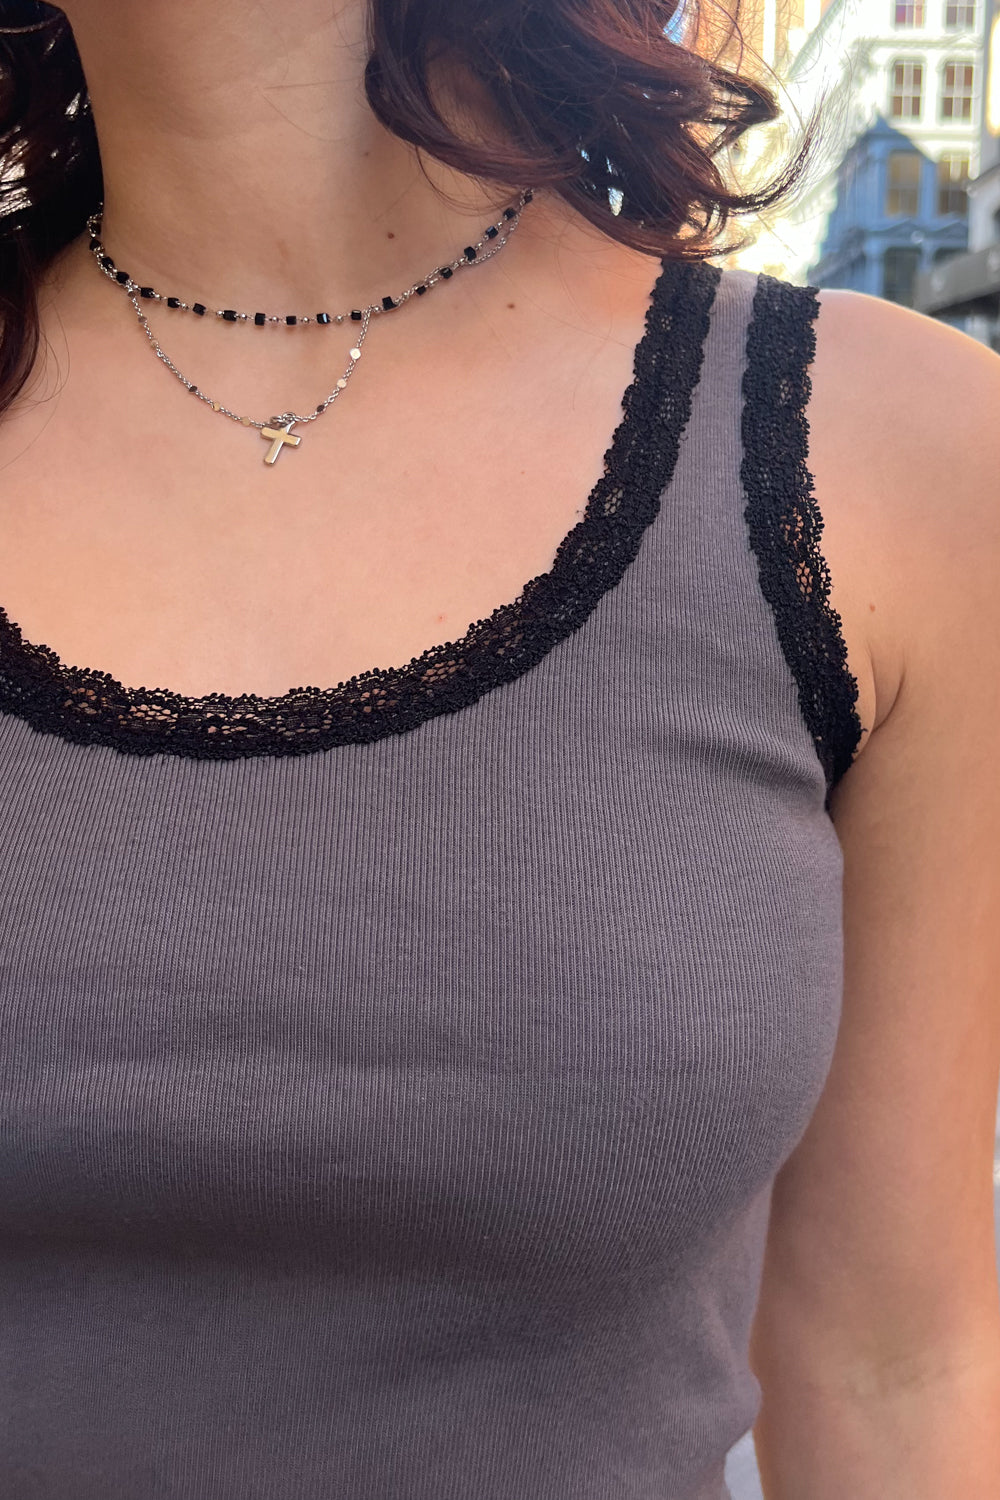 Brandy Melville NWOT Ronnie Long Lace Tank in Grey Gray - $9 - From Megan